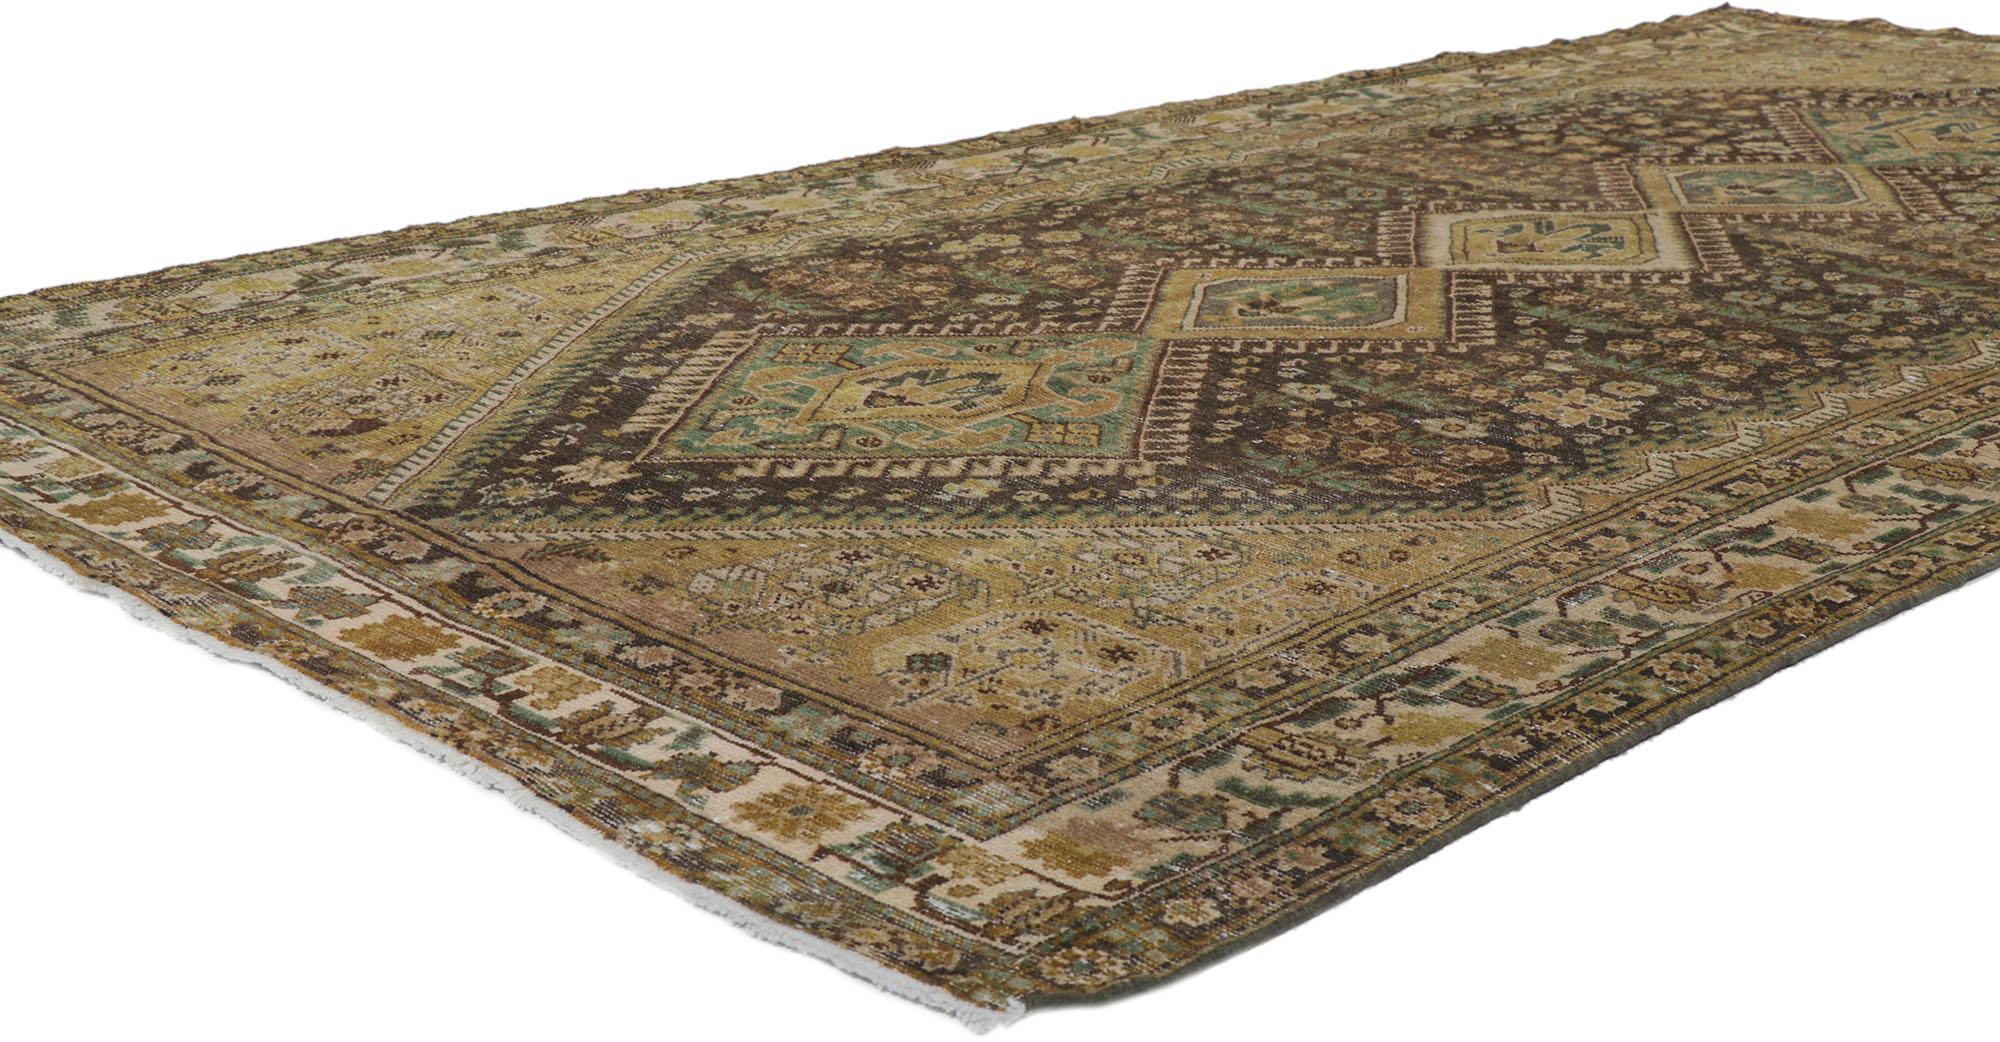 60981 Distressed Antique Persian Malayer Gallery rug 05'01 x 10'03. Balancing traditional sensibility and tribal design elements with nostalgic charm, this hand knotted wool distressed antique Persian Malayer gallery rug can beautifully blend